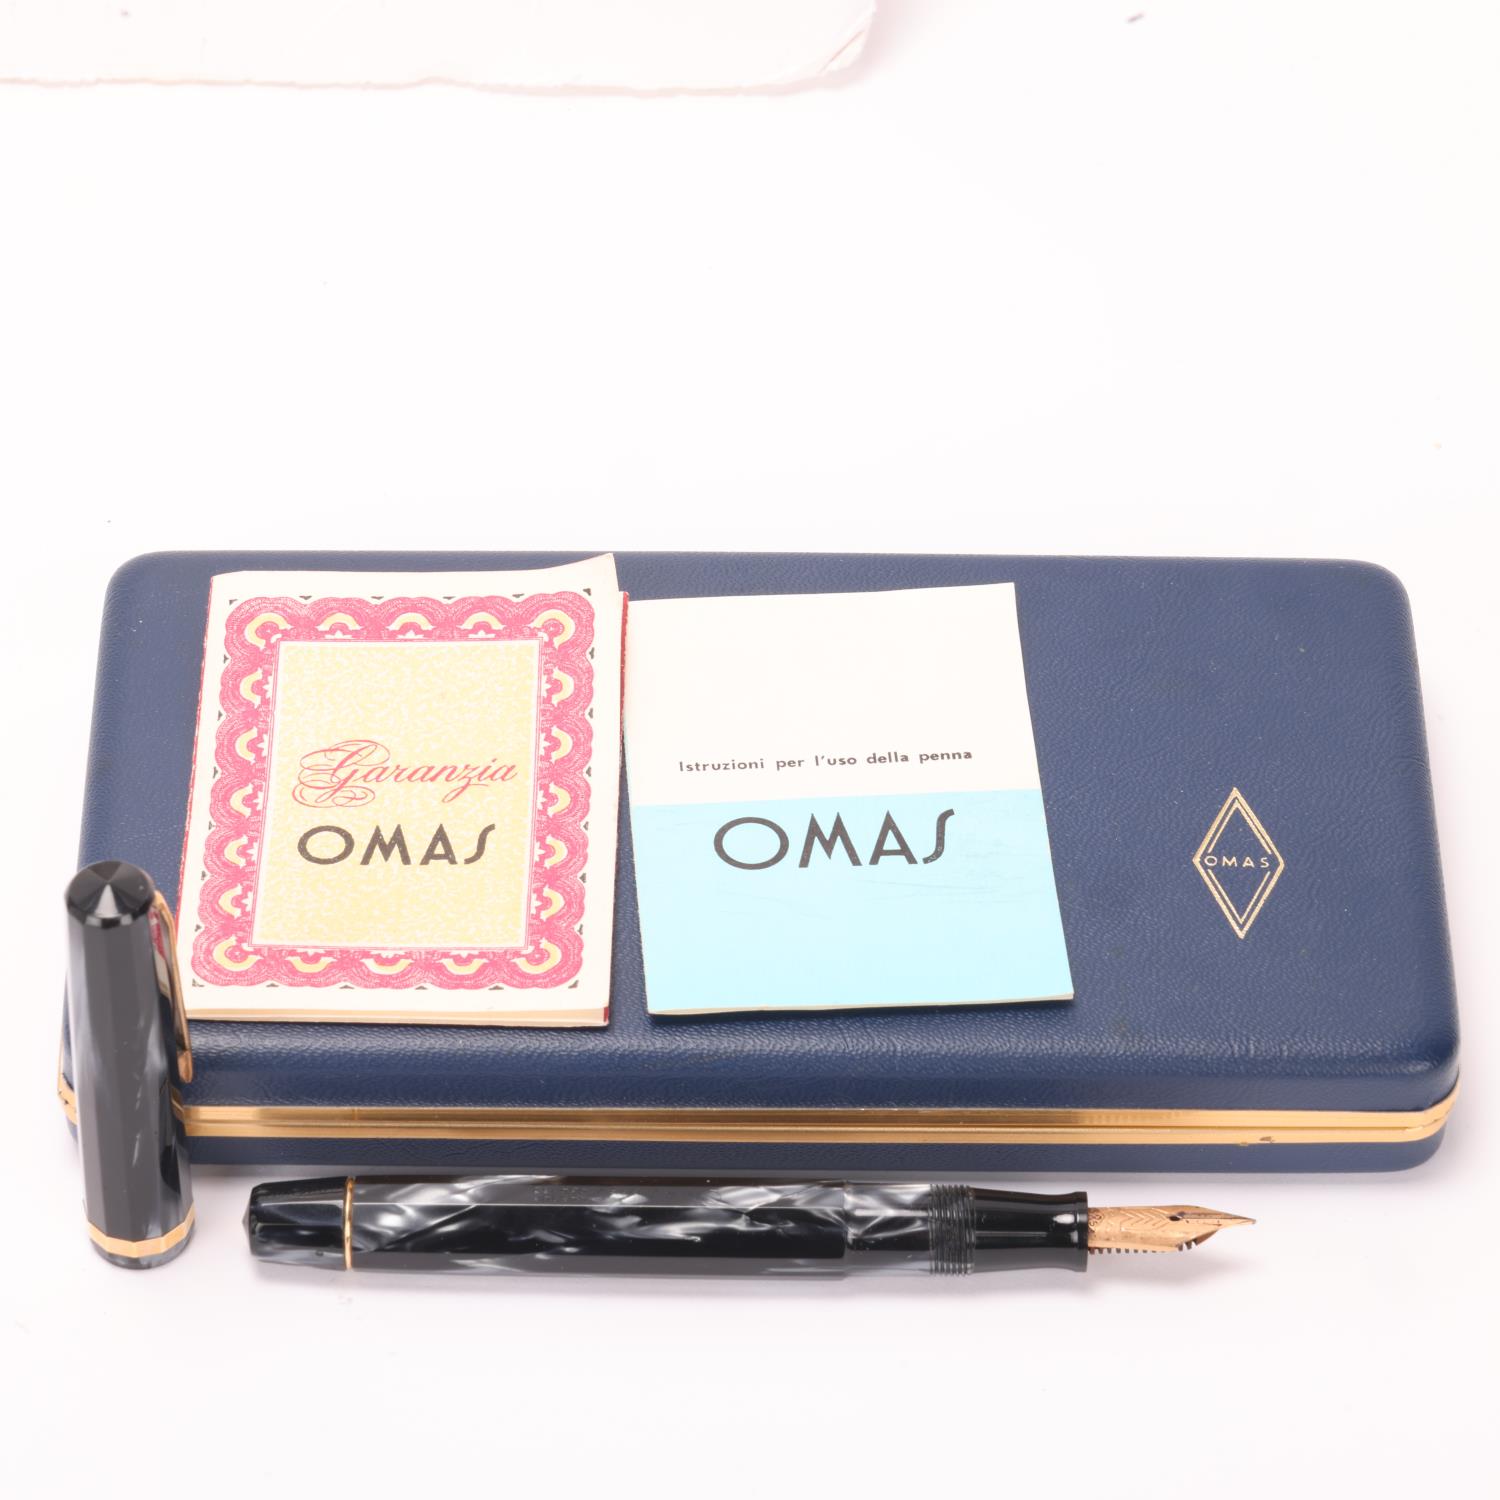 An Omas Dama fountain pen, with 14ct nib and black marbled resin, marked "EXTRA 445846 - Image 4 of 4